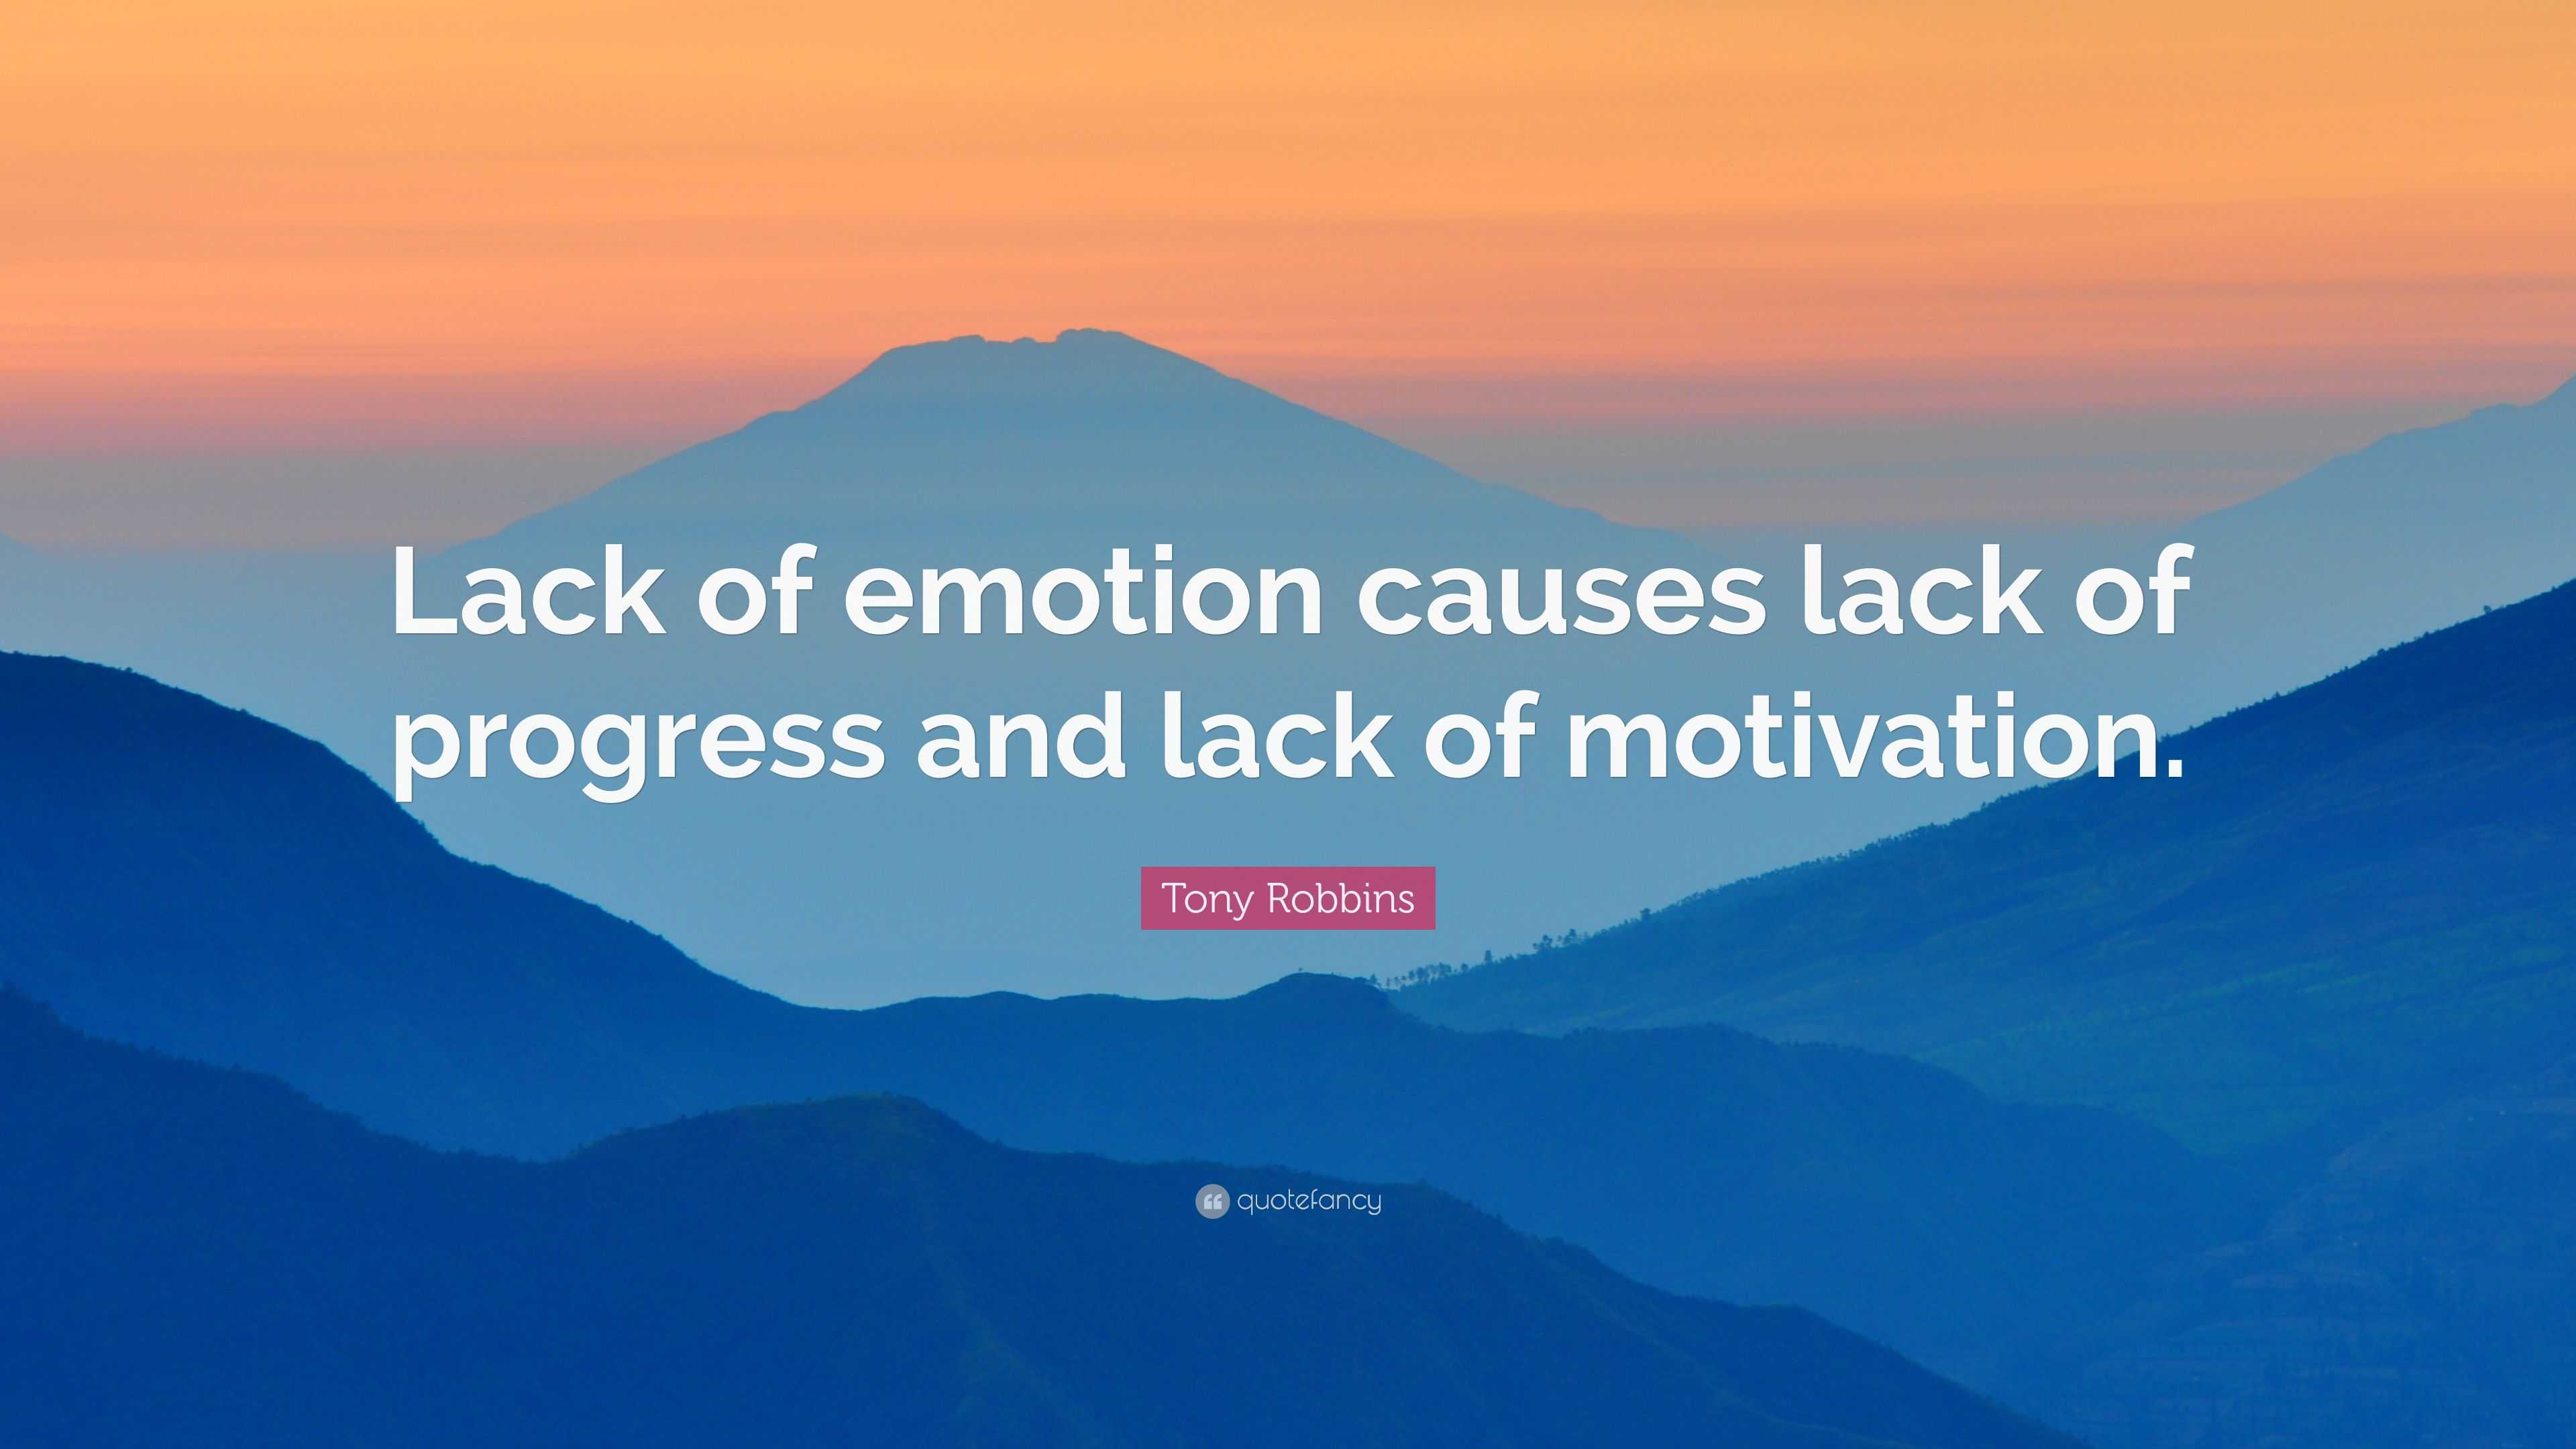 Tony Robbins Quote: “Lack of emotion causes lack of progress and lack